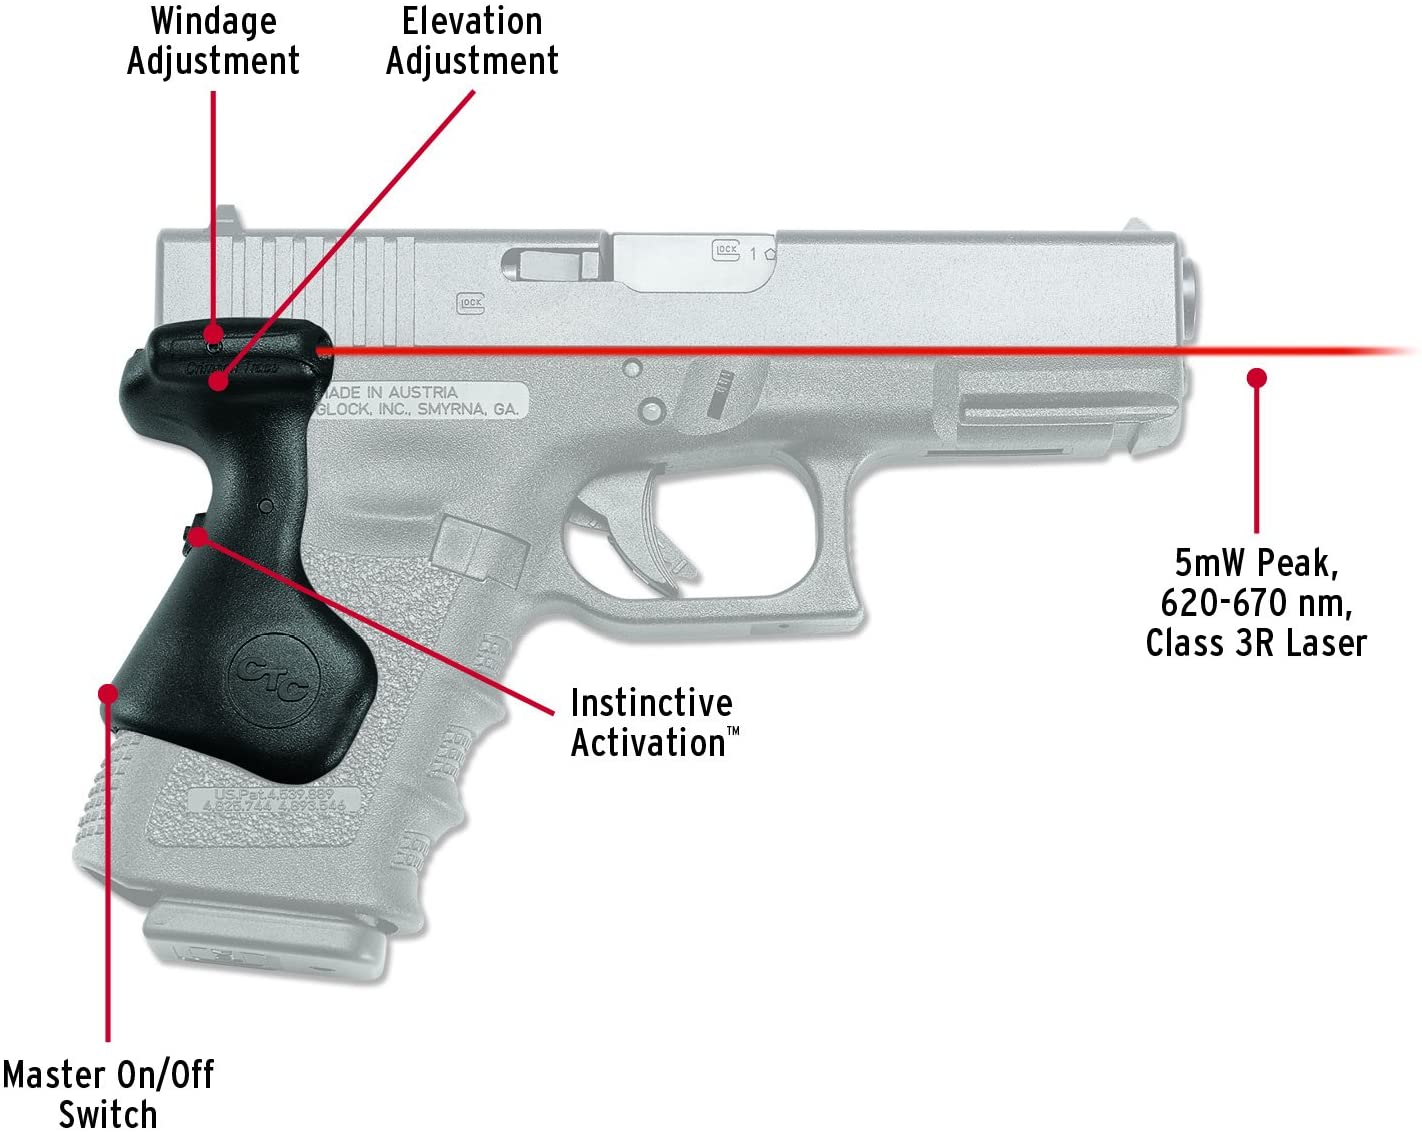 Crimson Trace LG-639 for Glock Gen 3, 4, or 5 Compact